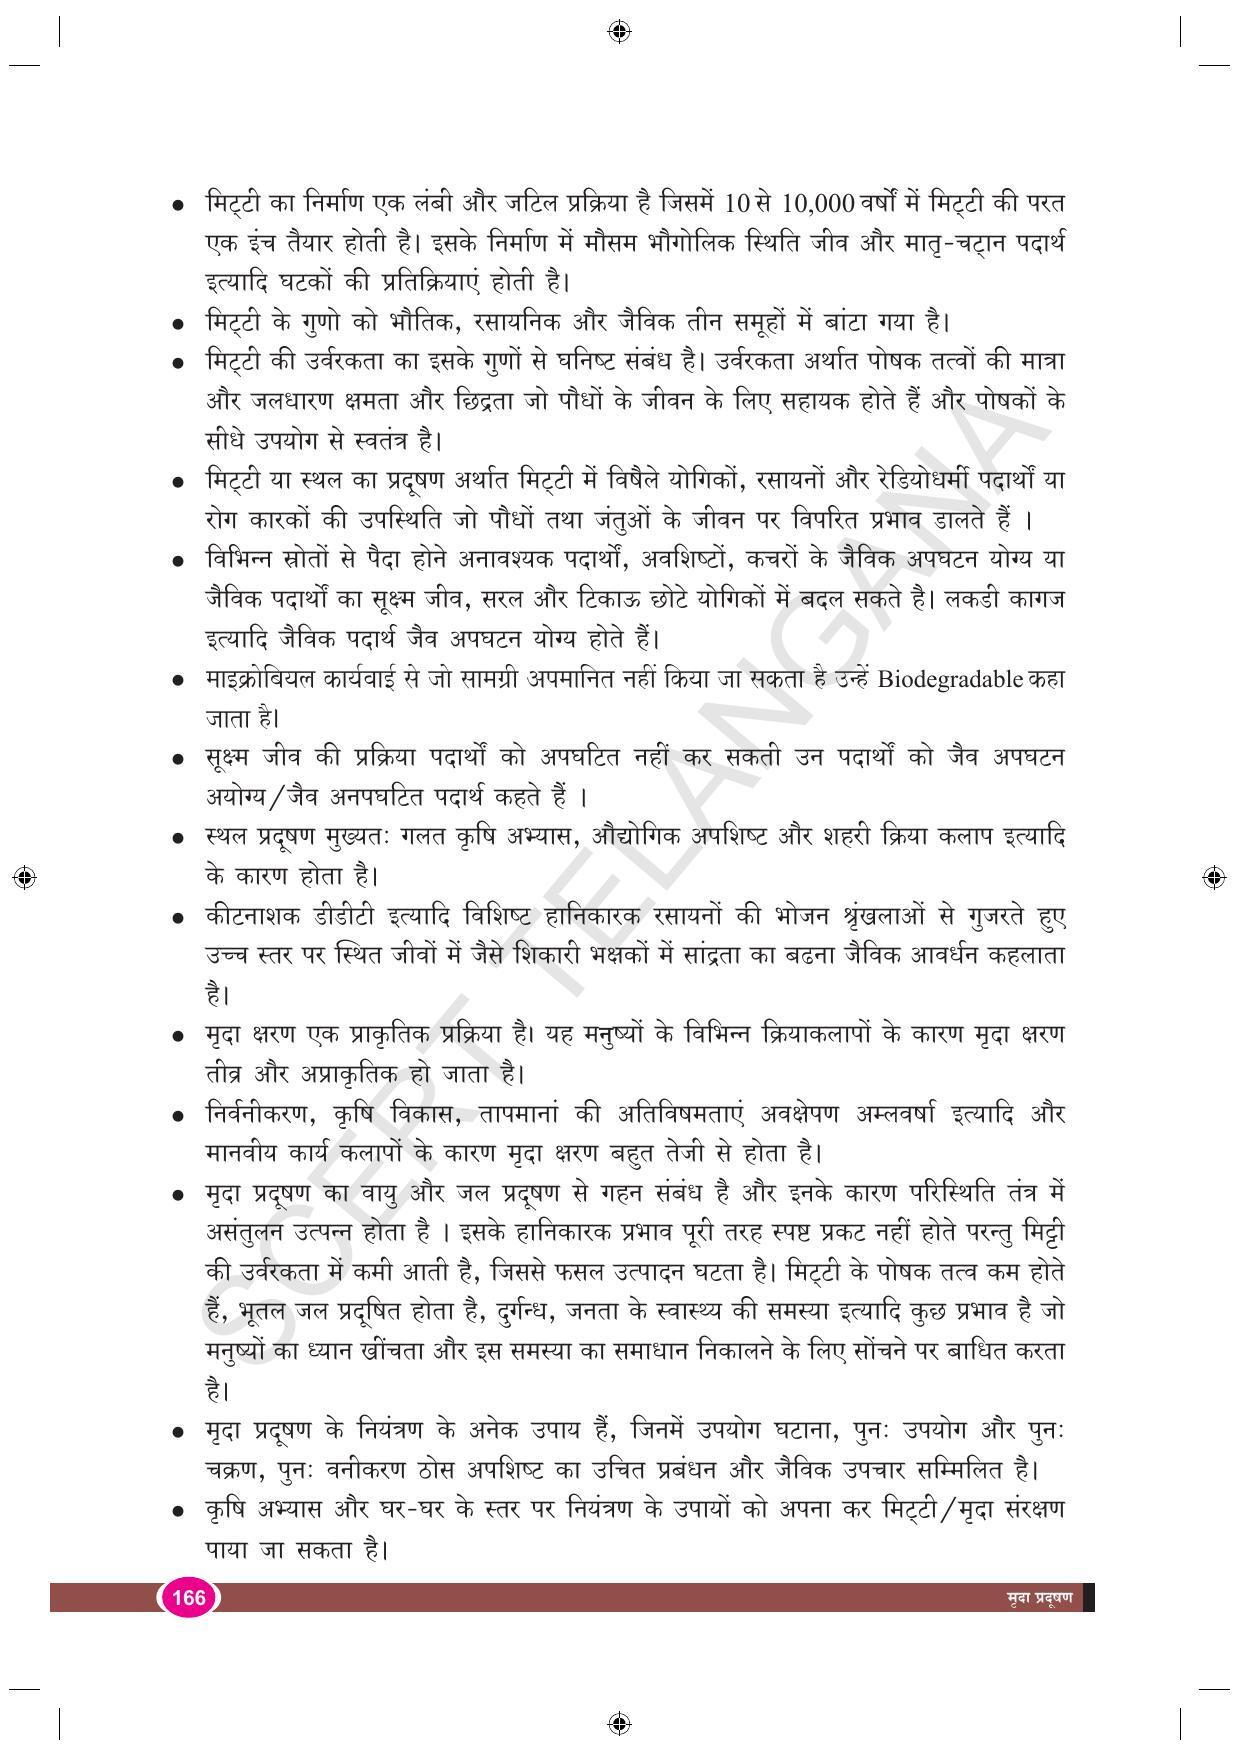 TS SCERT Class 9 Biological Science (Hindi Medium) Text Book - Page 178